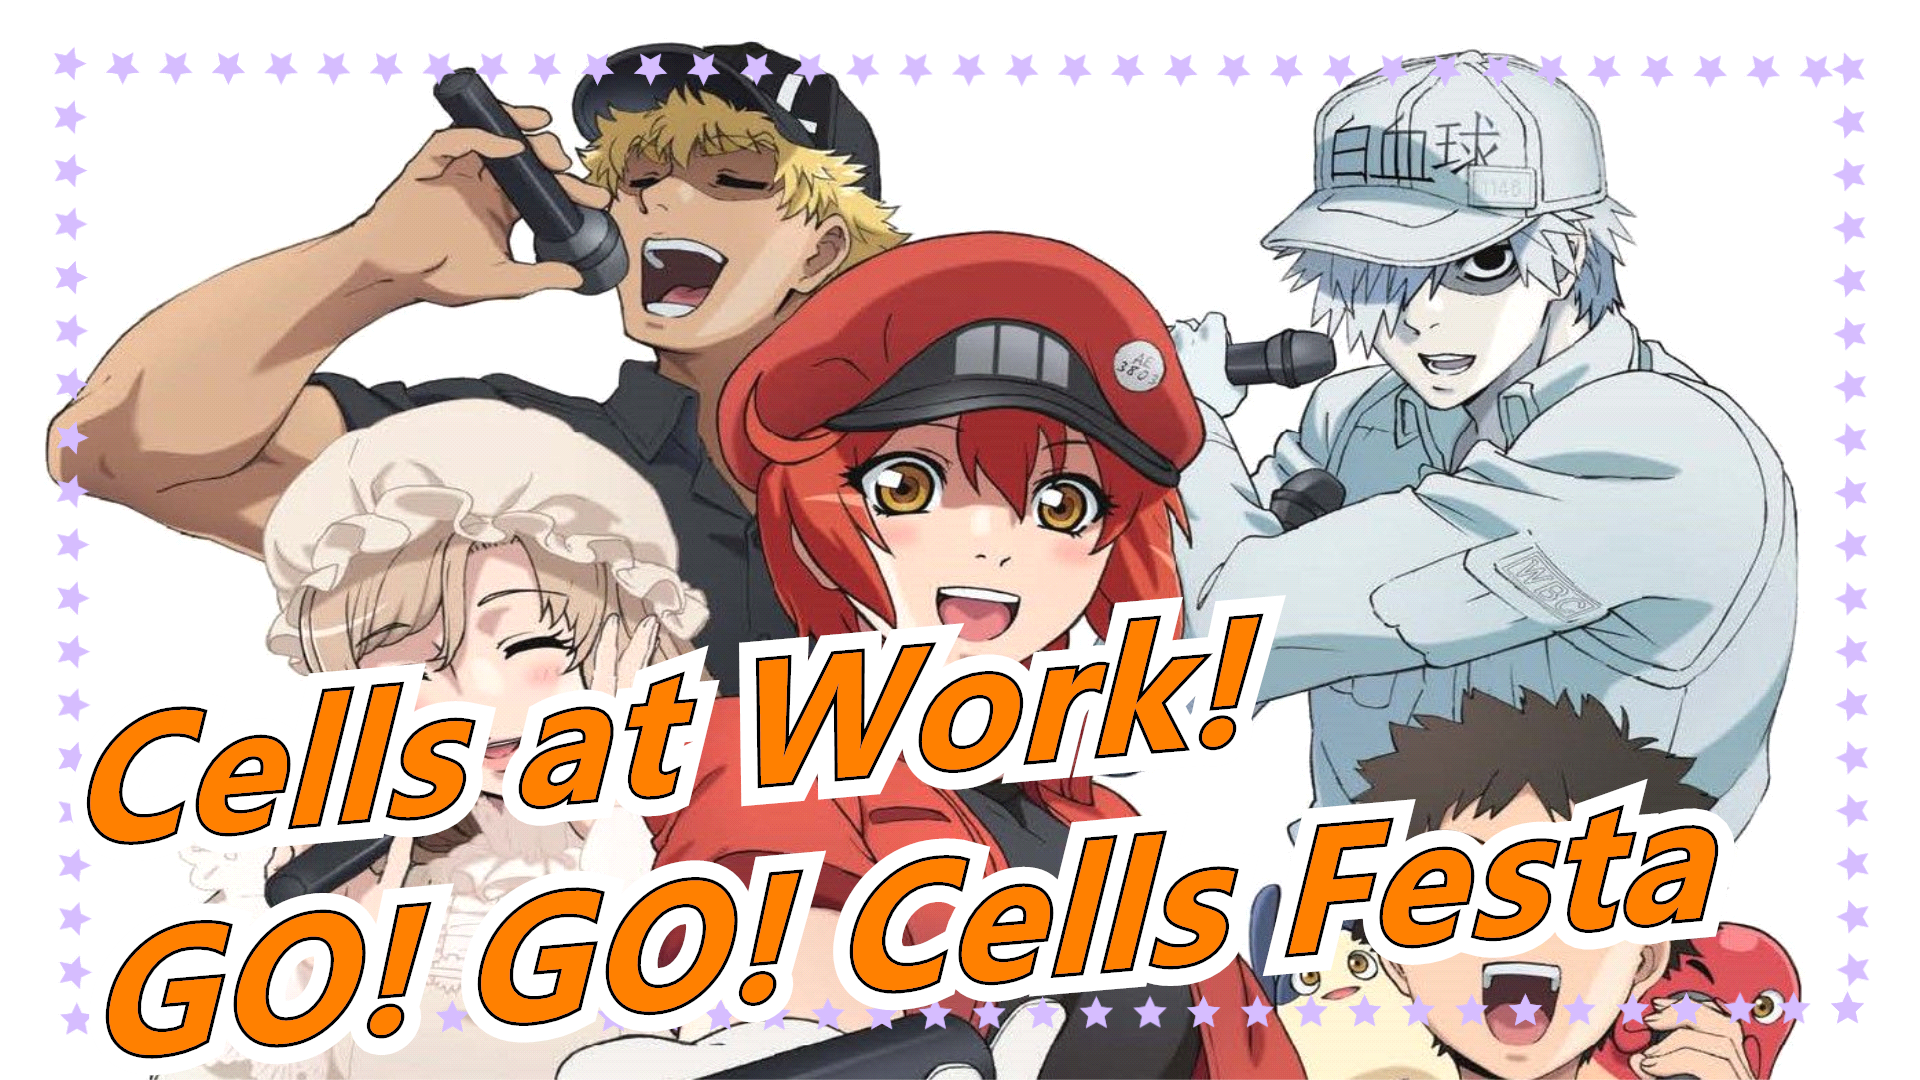 Hataraku Saibou!! S2 [OPENING], Song of : Anime - Hataraku Saibou!! S2  Title : Go! Go! Saibou Festa Character : Red Blood Cell, White Blood Cell,  Killer T Cell/Memory T Cell,, By Xivlio